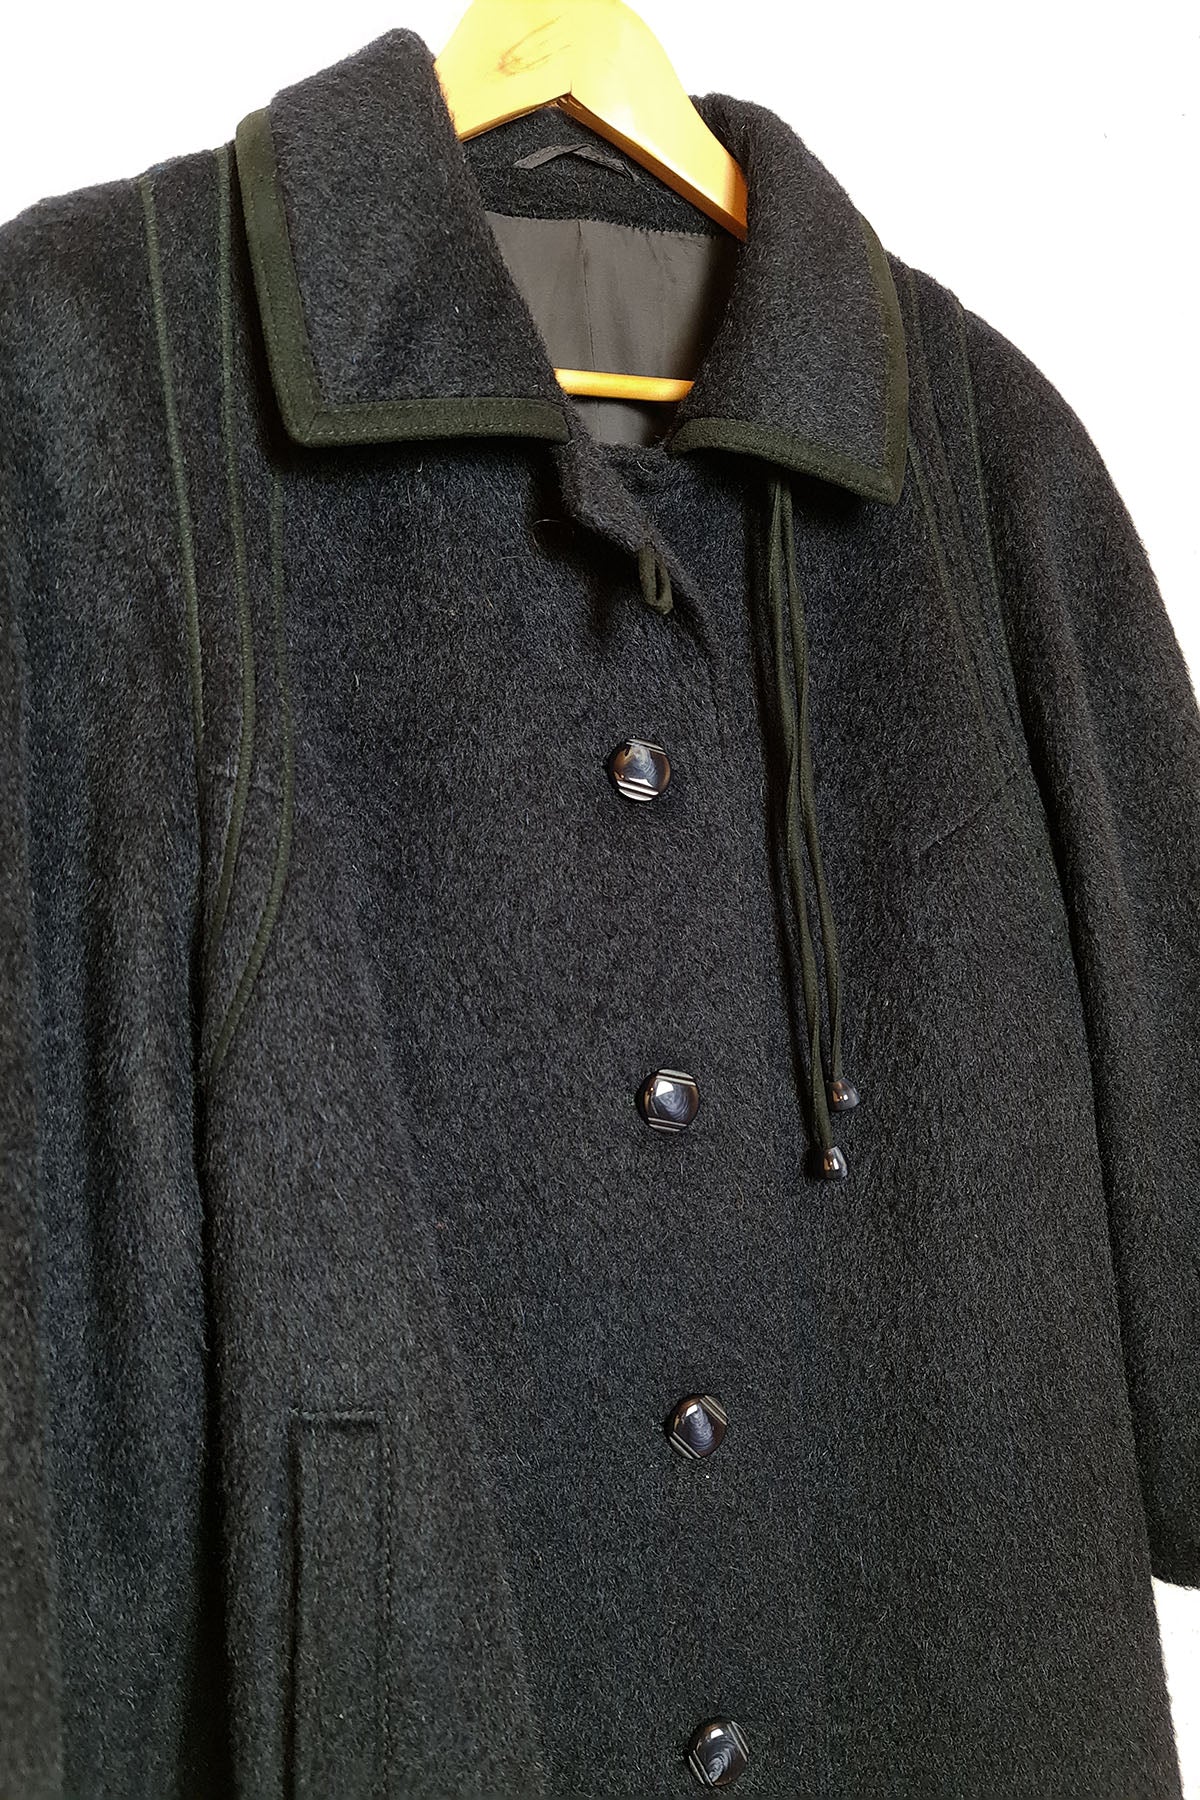 Vintage Wool Coat With Leather Accents